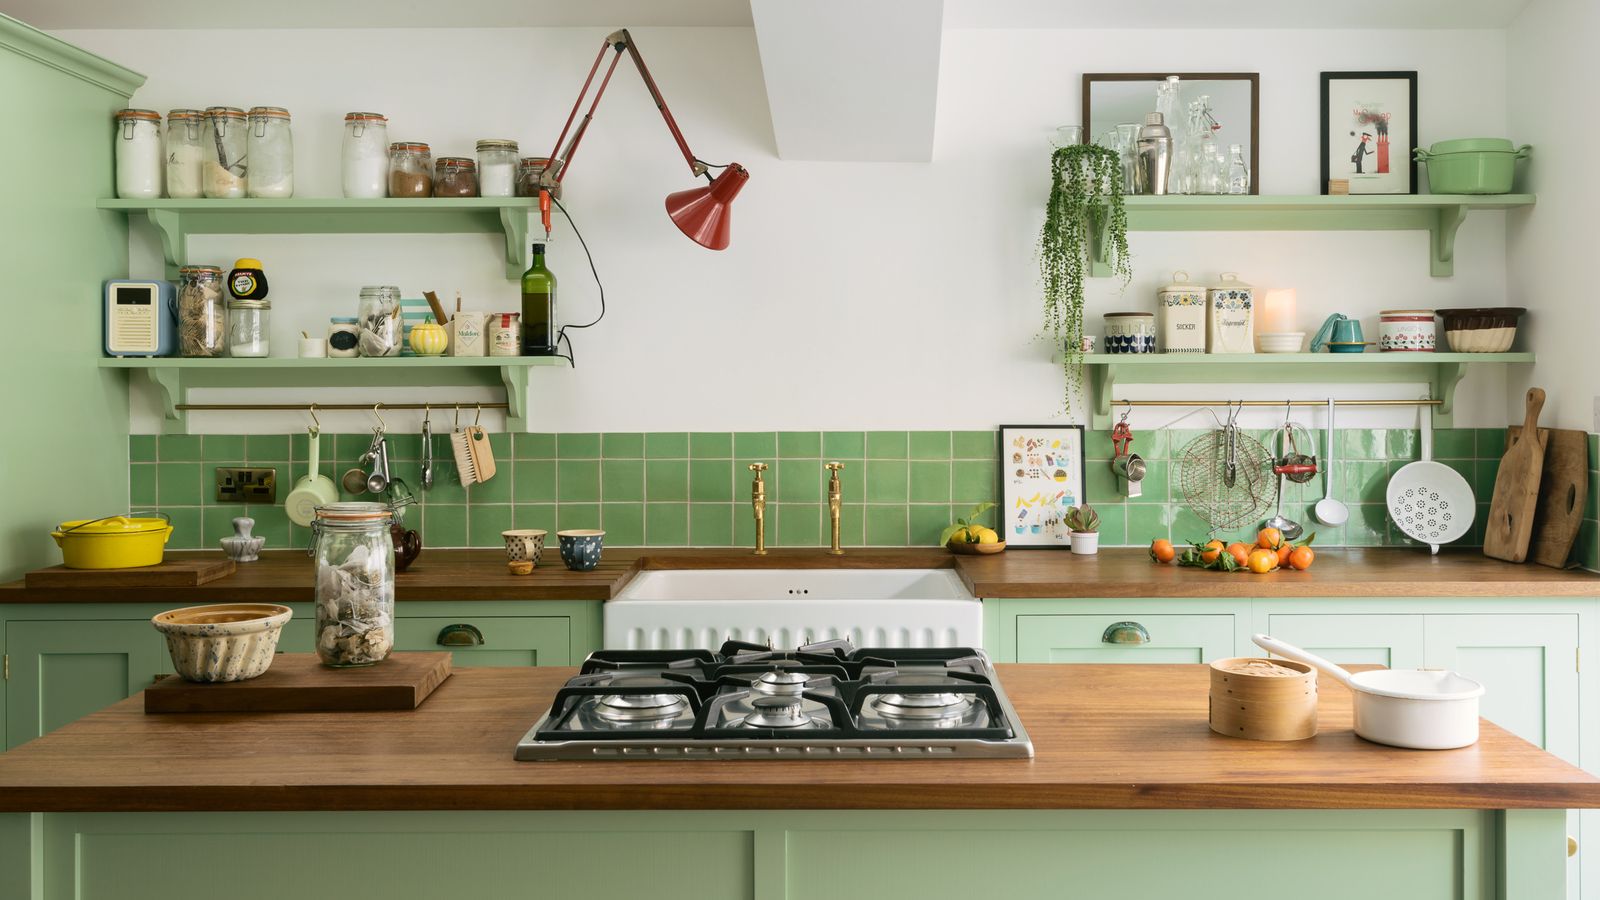 The green kitchen wellness trend will enrich your home this 2022 ...